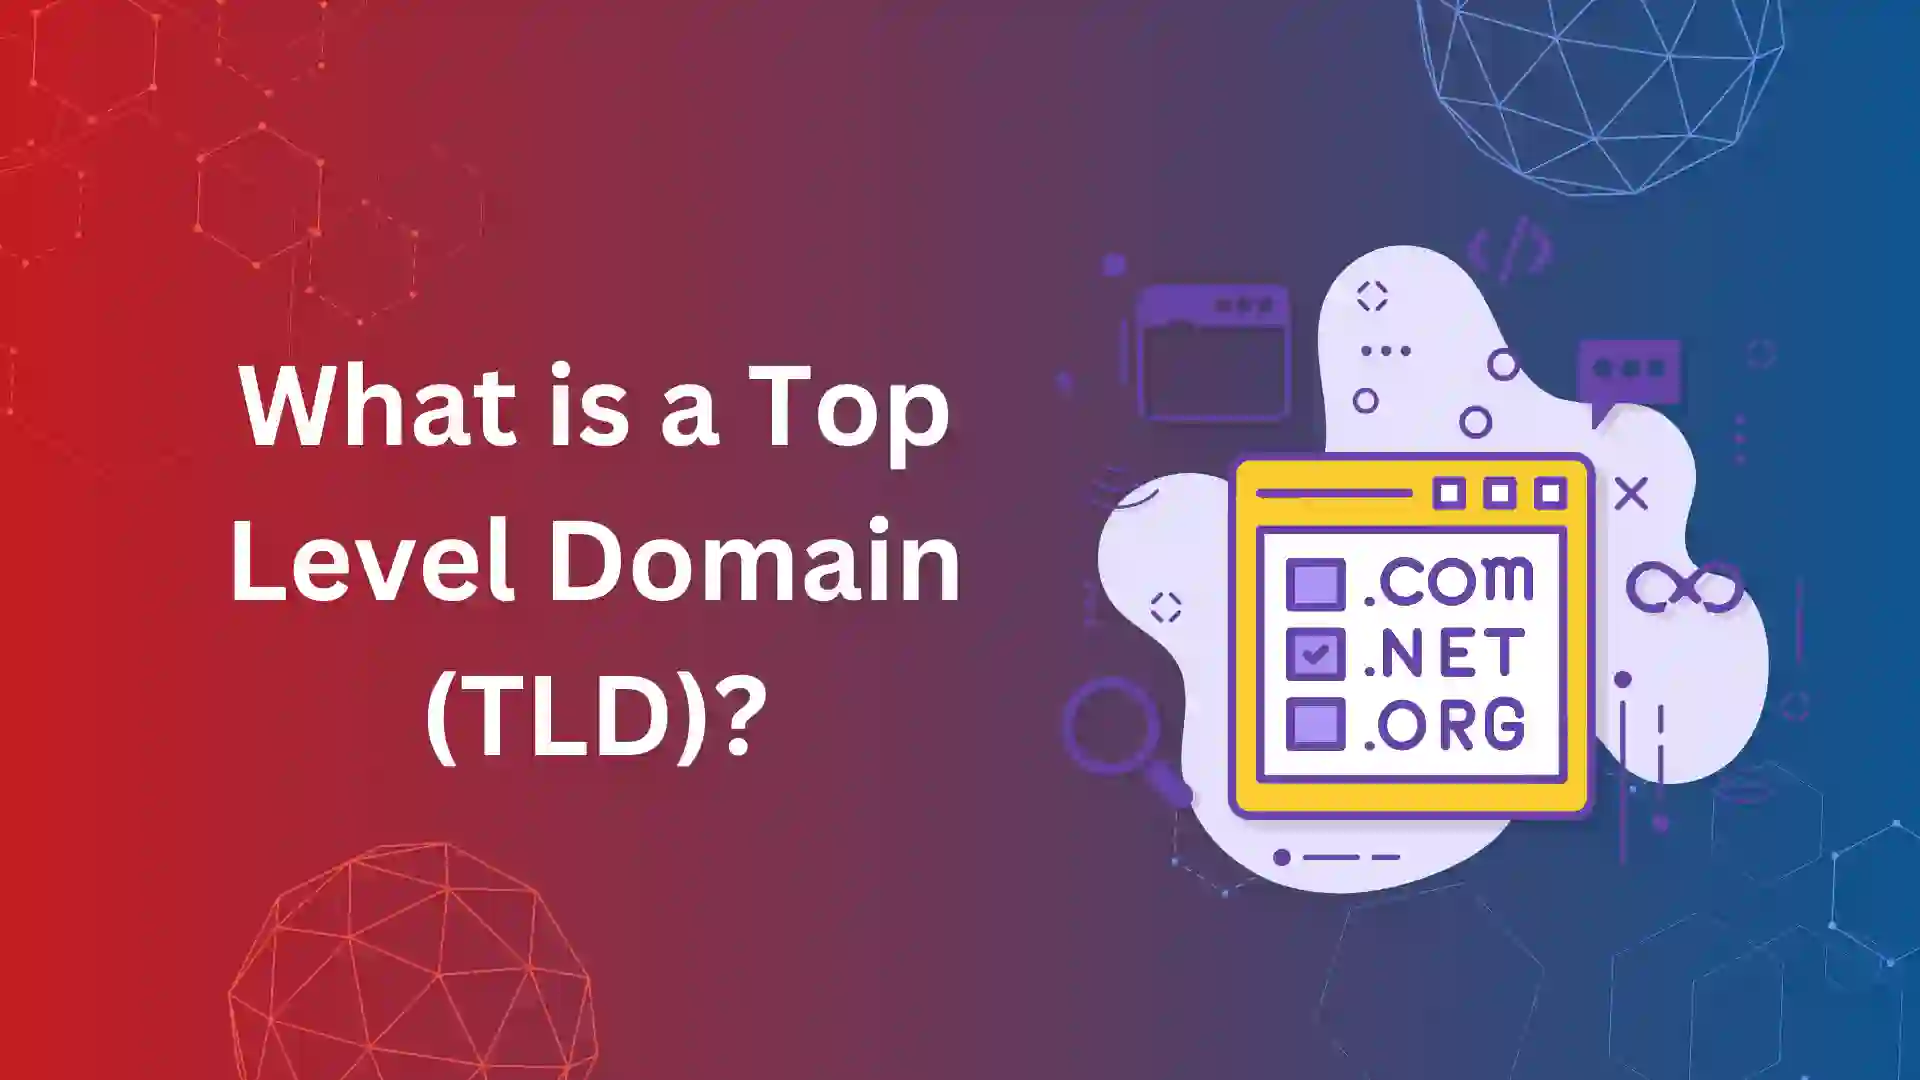 What is a Top Level Domain (TLD)